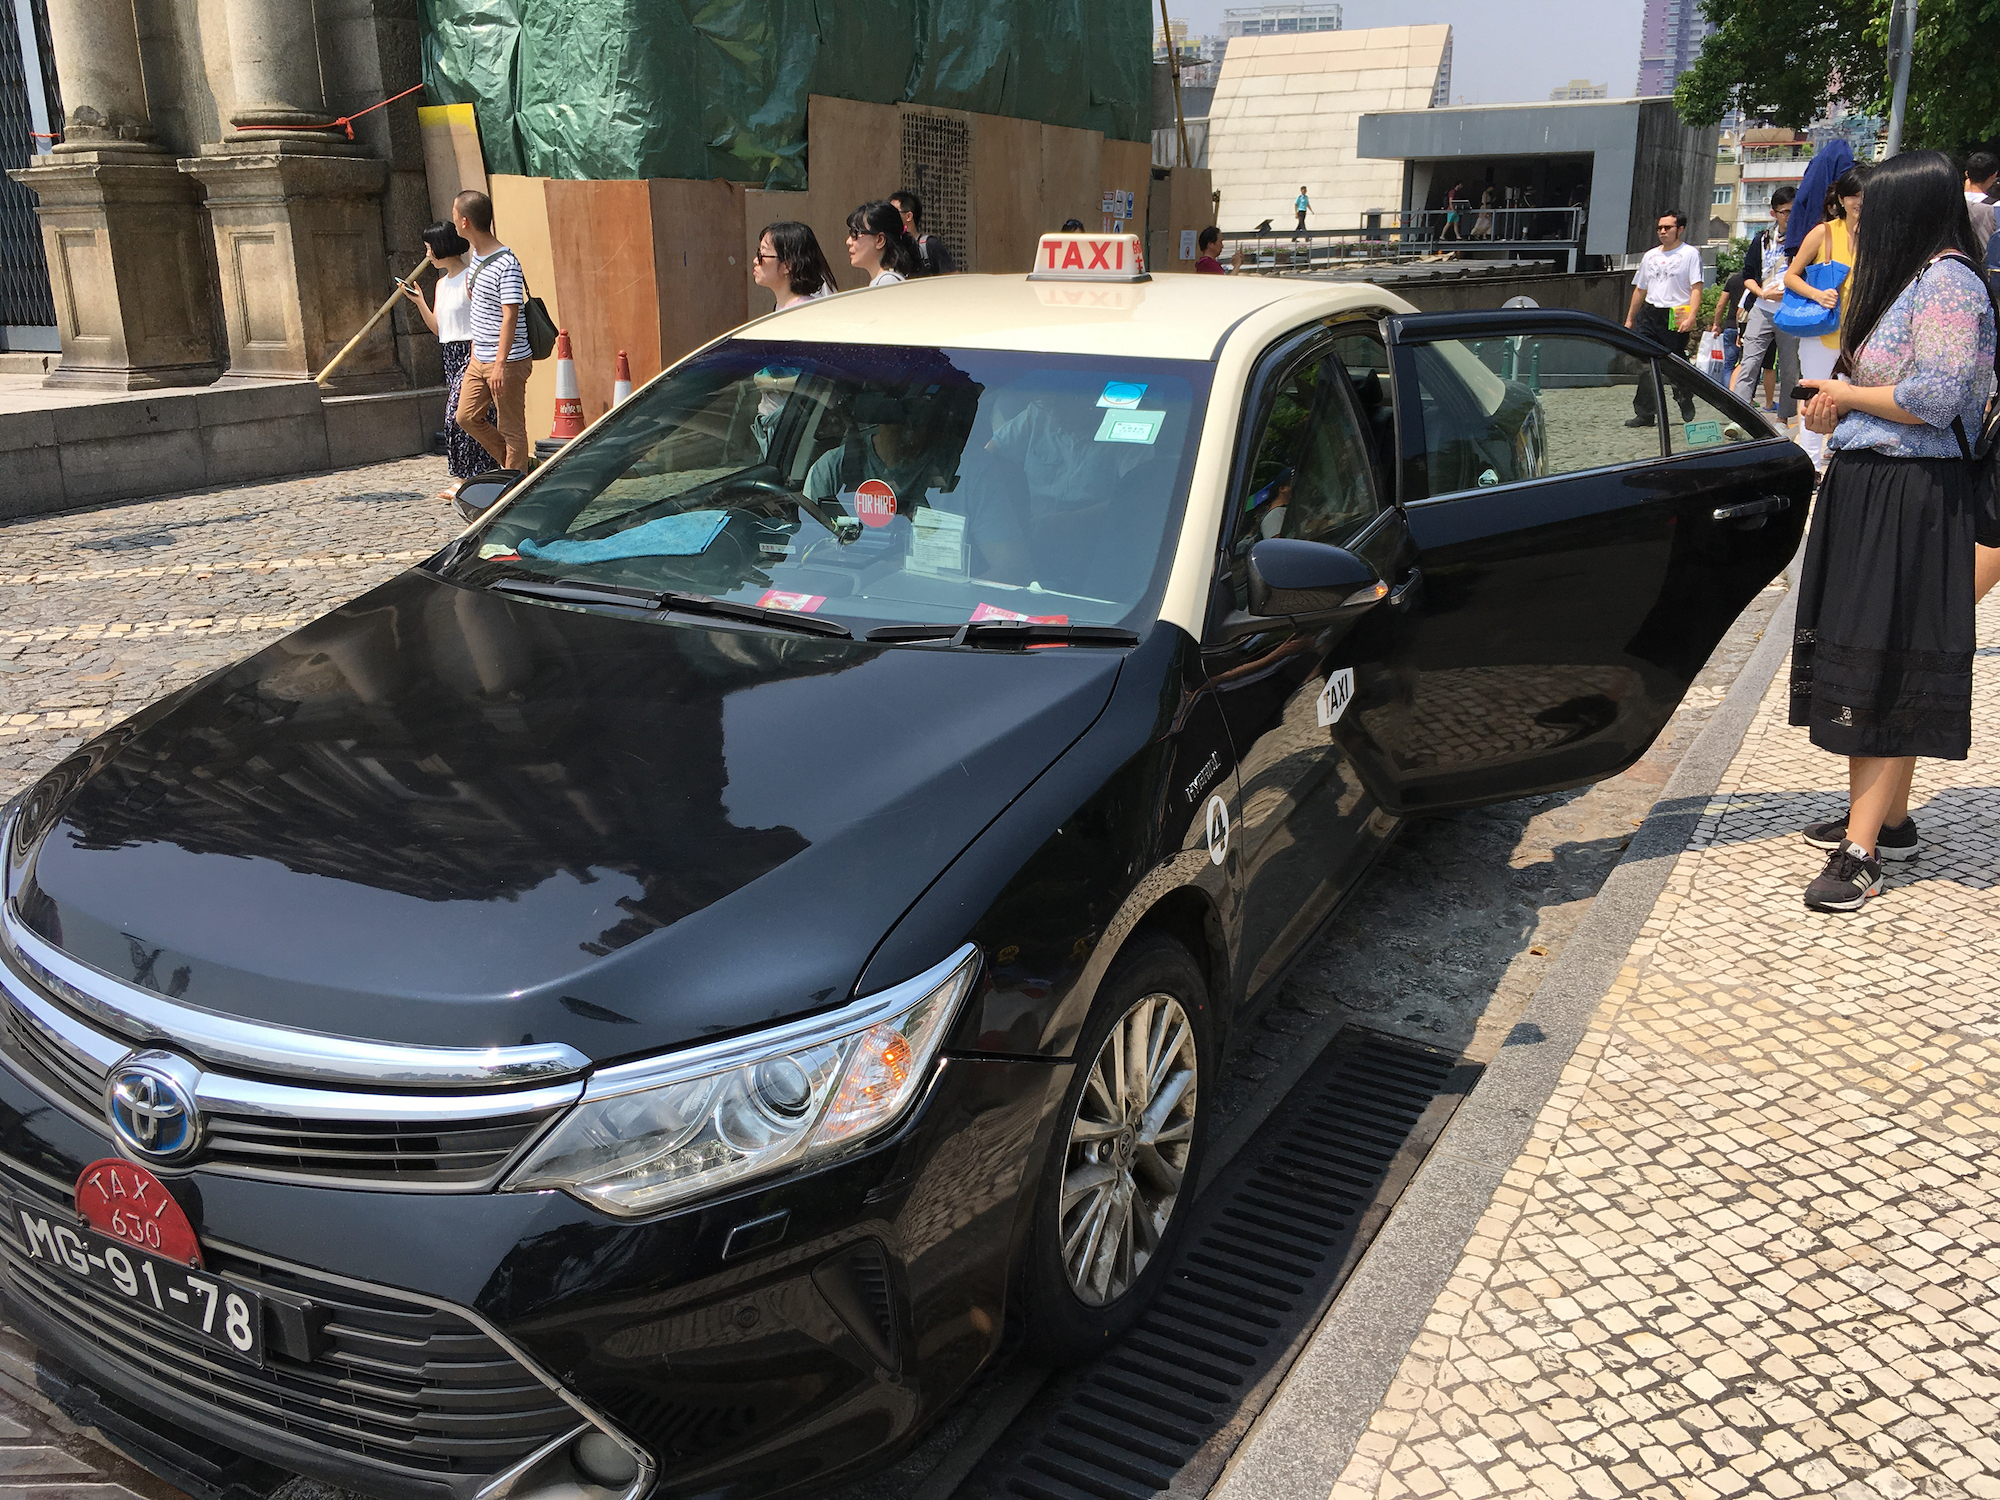 Will 500 new taxis be enough to meet demand? ‘Maybe not’ says Rosário